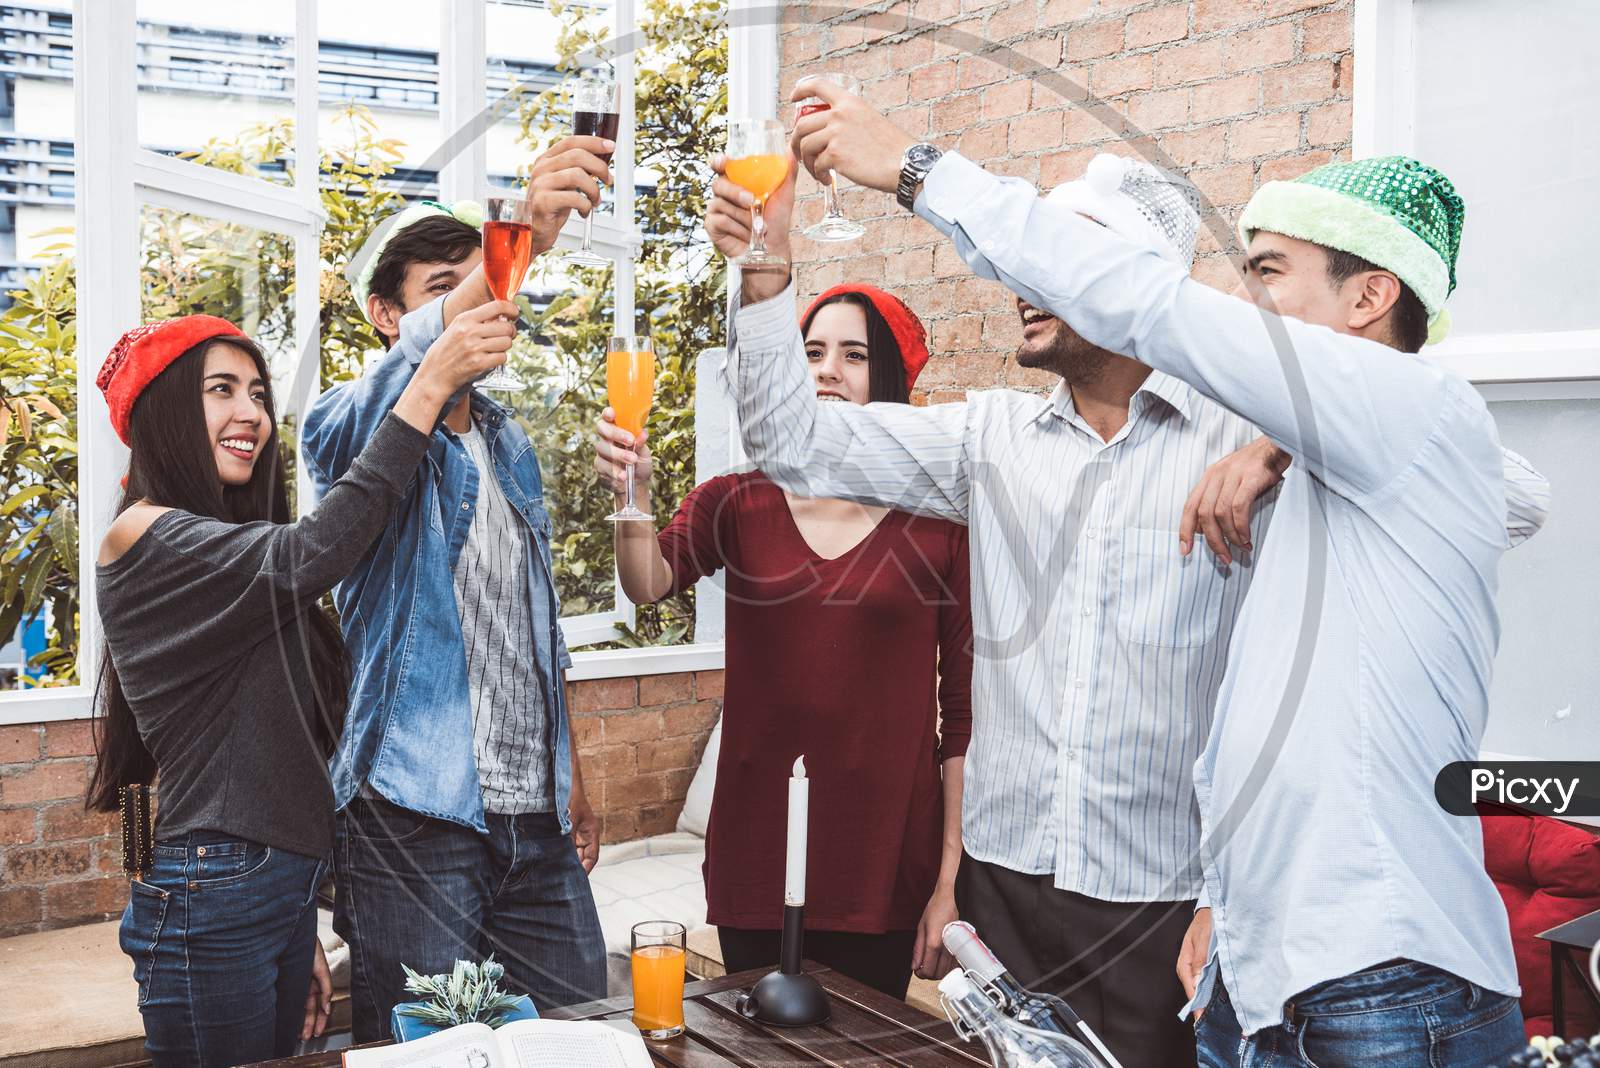 Outdoor Xmas Party Shot Of Young People Toasting Drinking Glass At A Rooftop Terrace As Forever Friendship. Young Friends Hang Out With Alcohol Drinking And Juice. Christmas And New Year Party Theme.